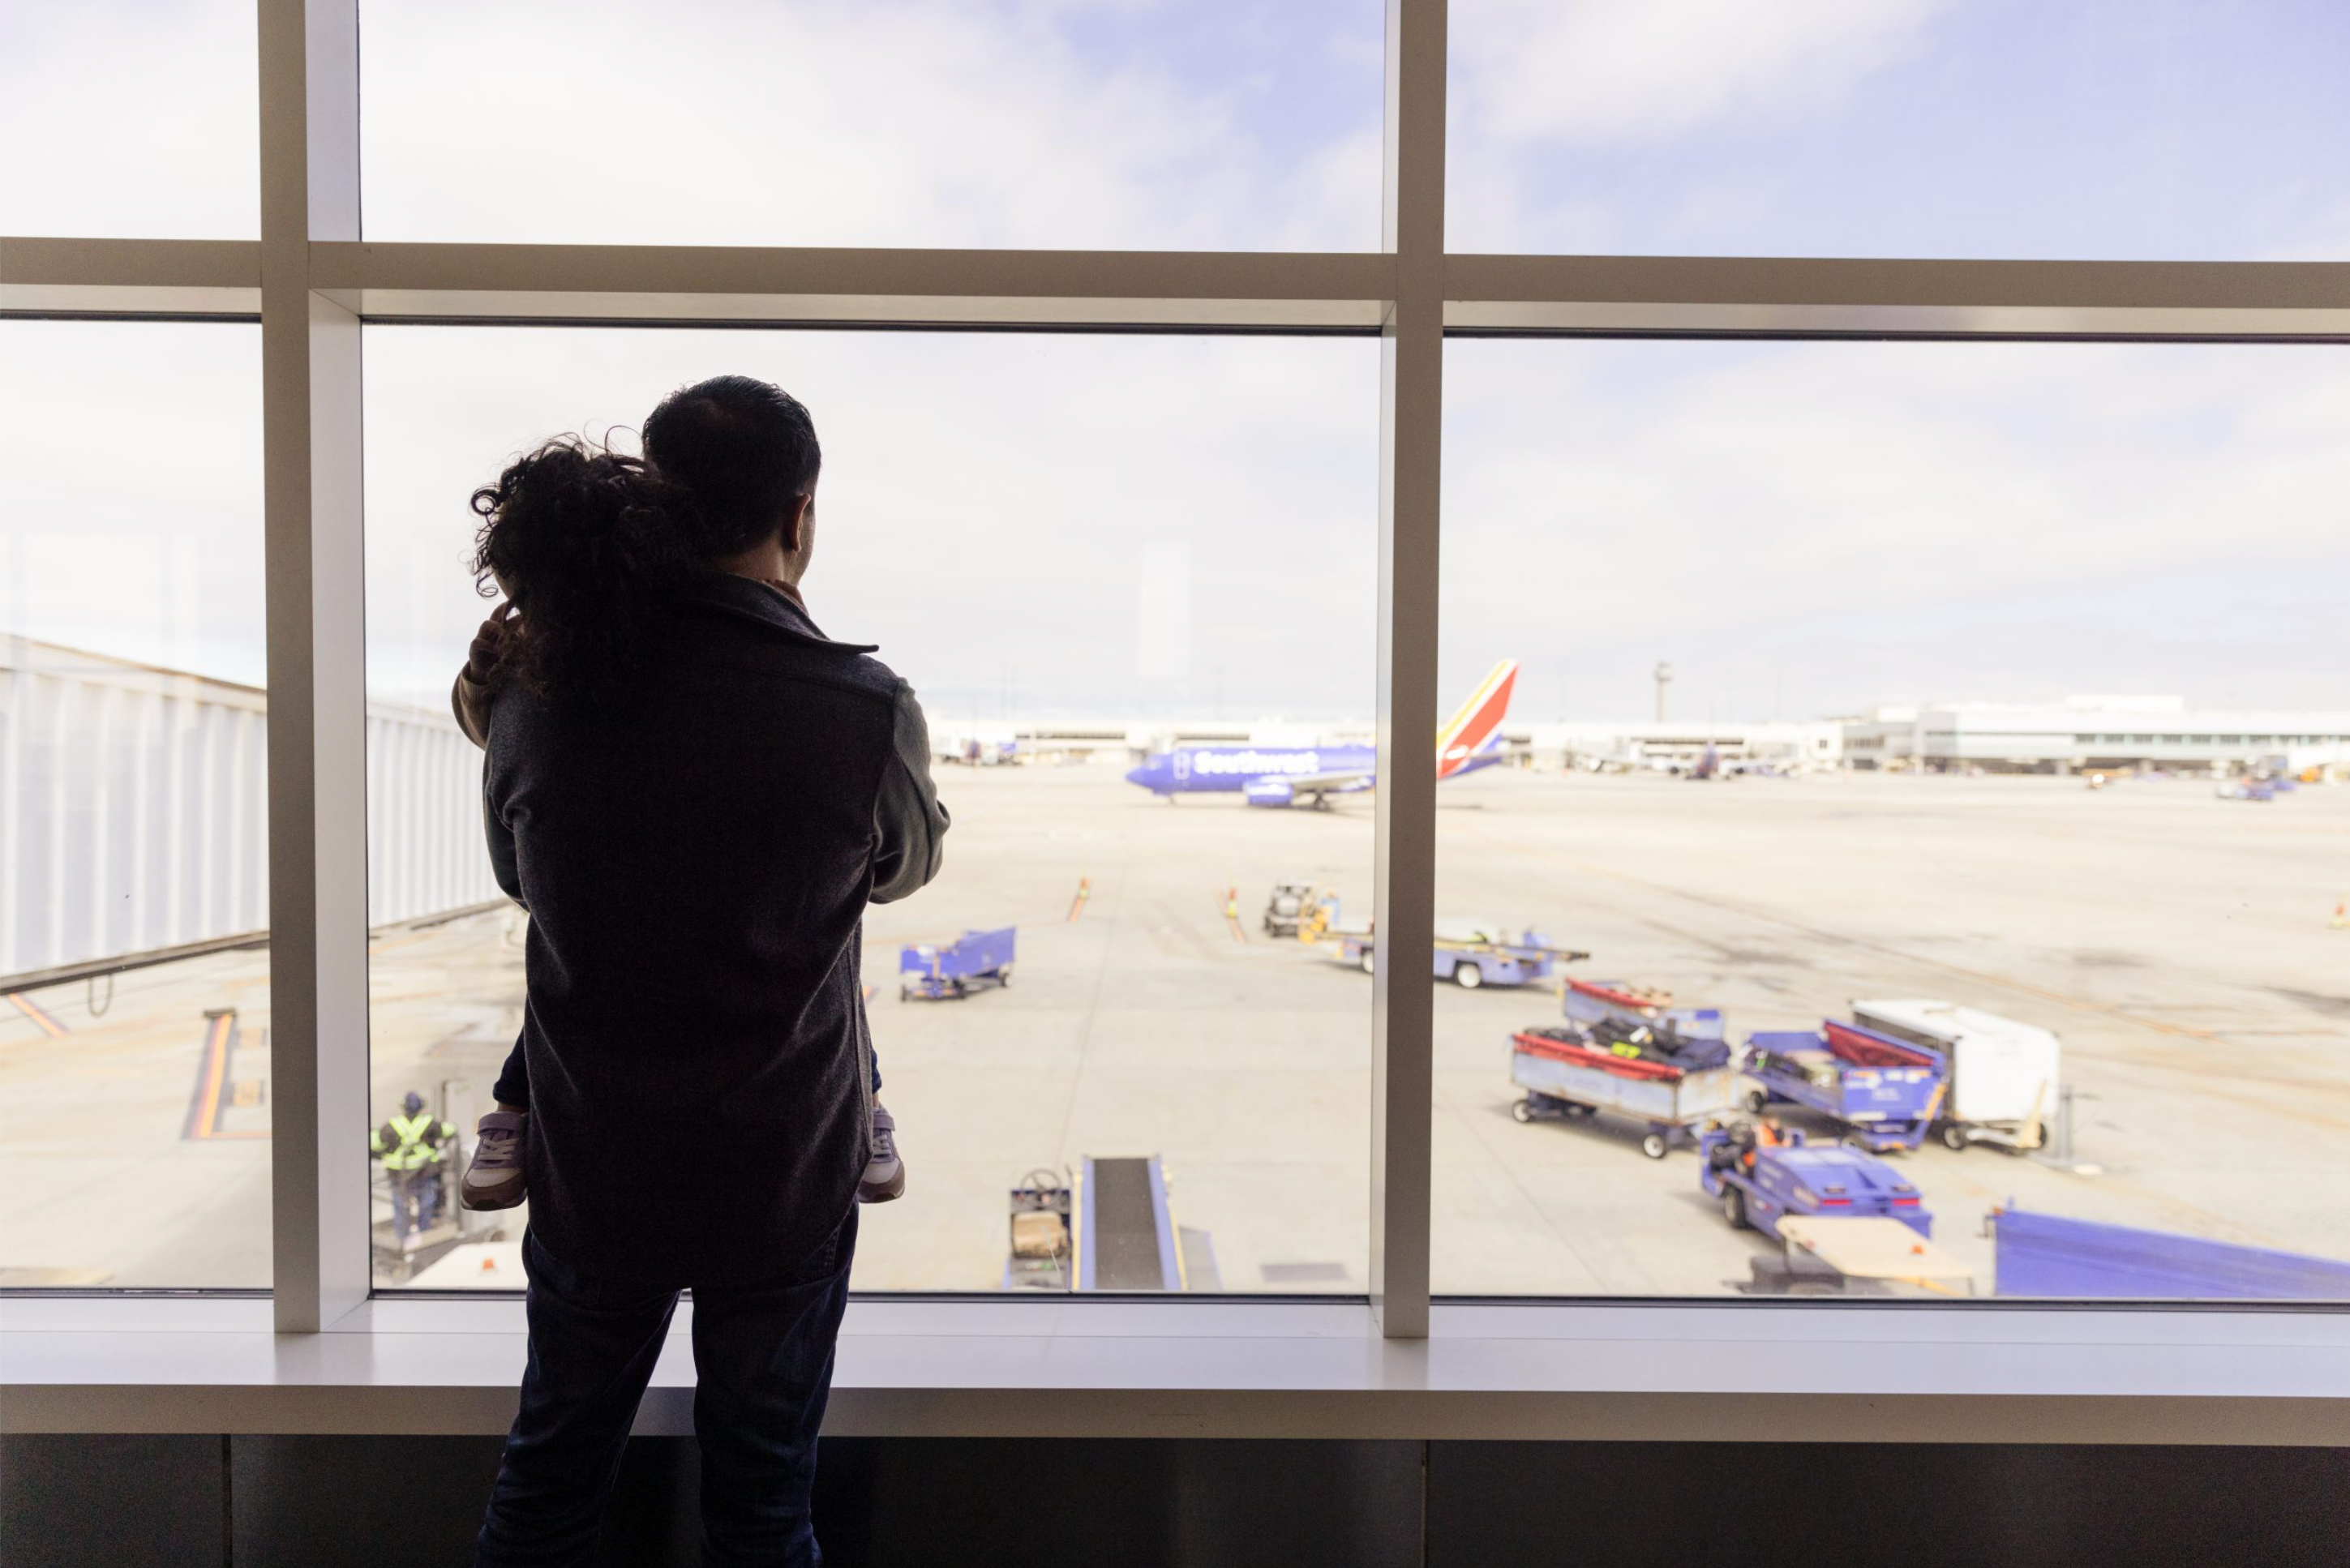 Passenger and child looking out over Oakland airport apron